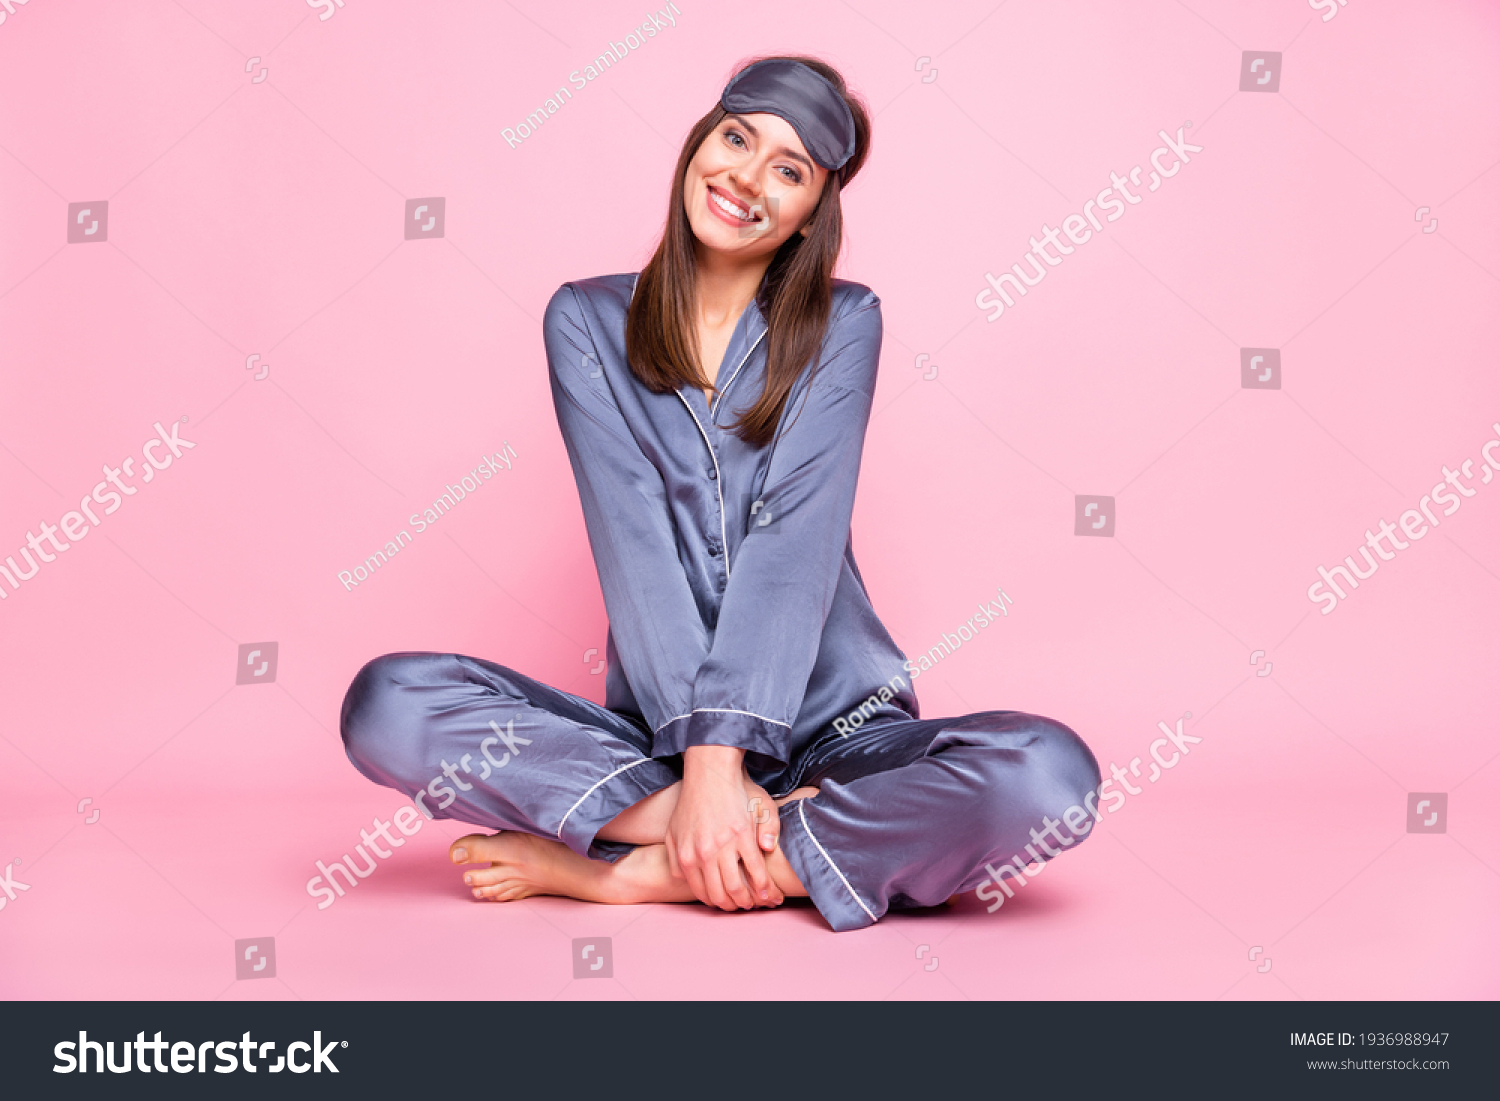 Full length photo portrait of cute girl sitting in lotus pose isolated on pastel pink colored background #1936988947